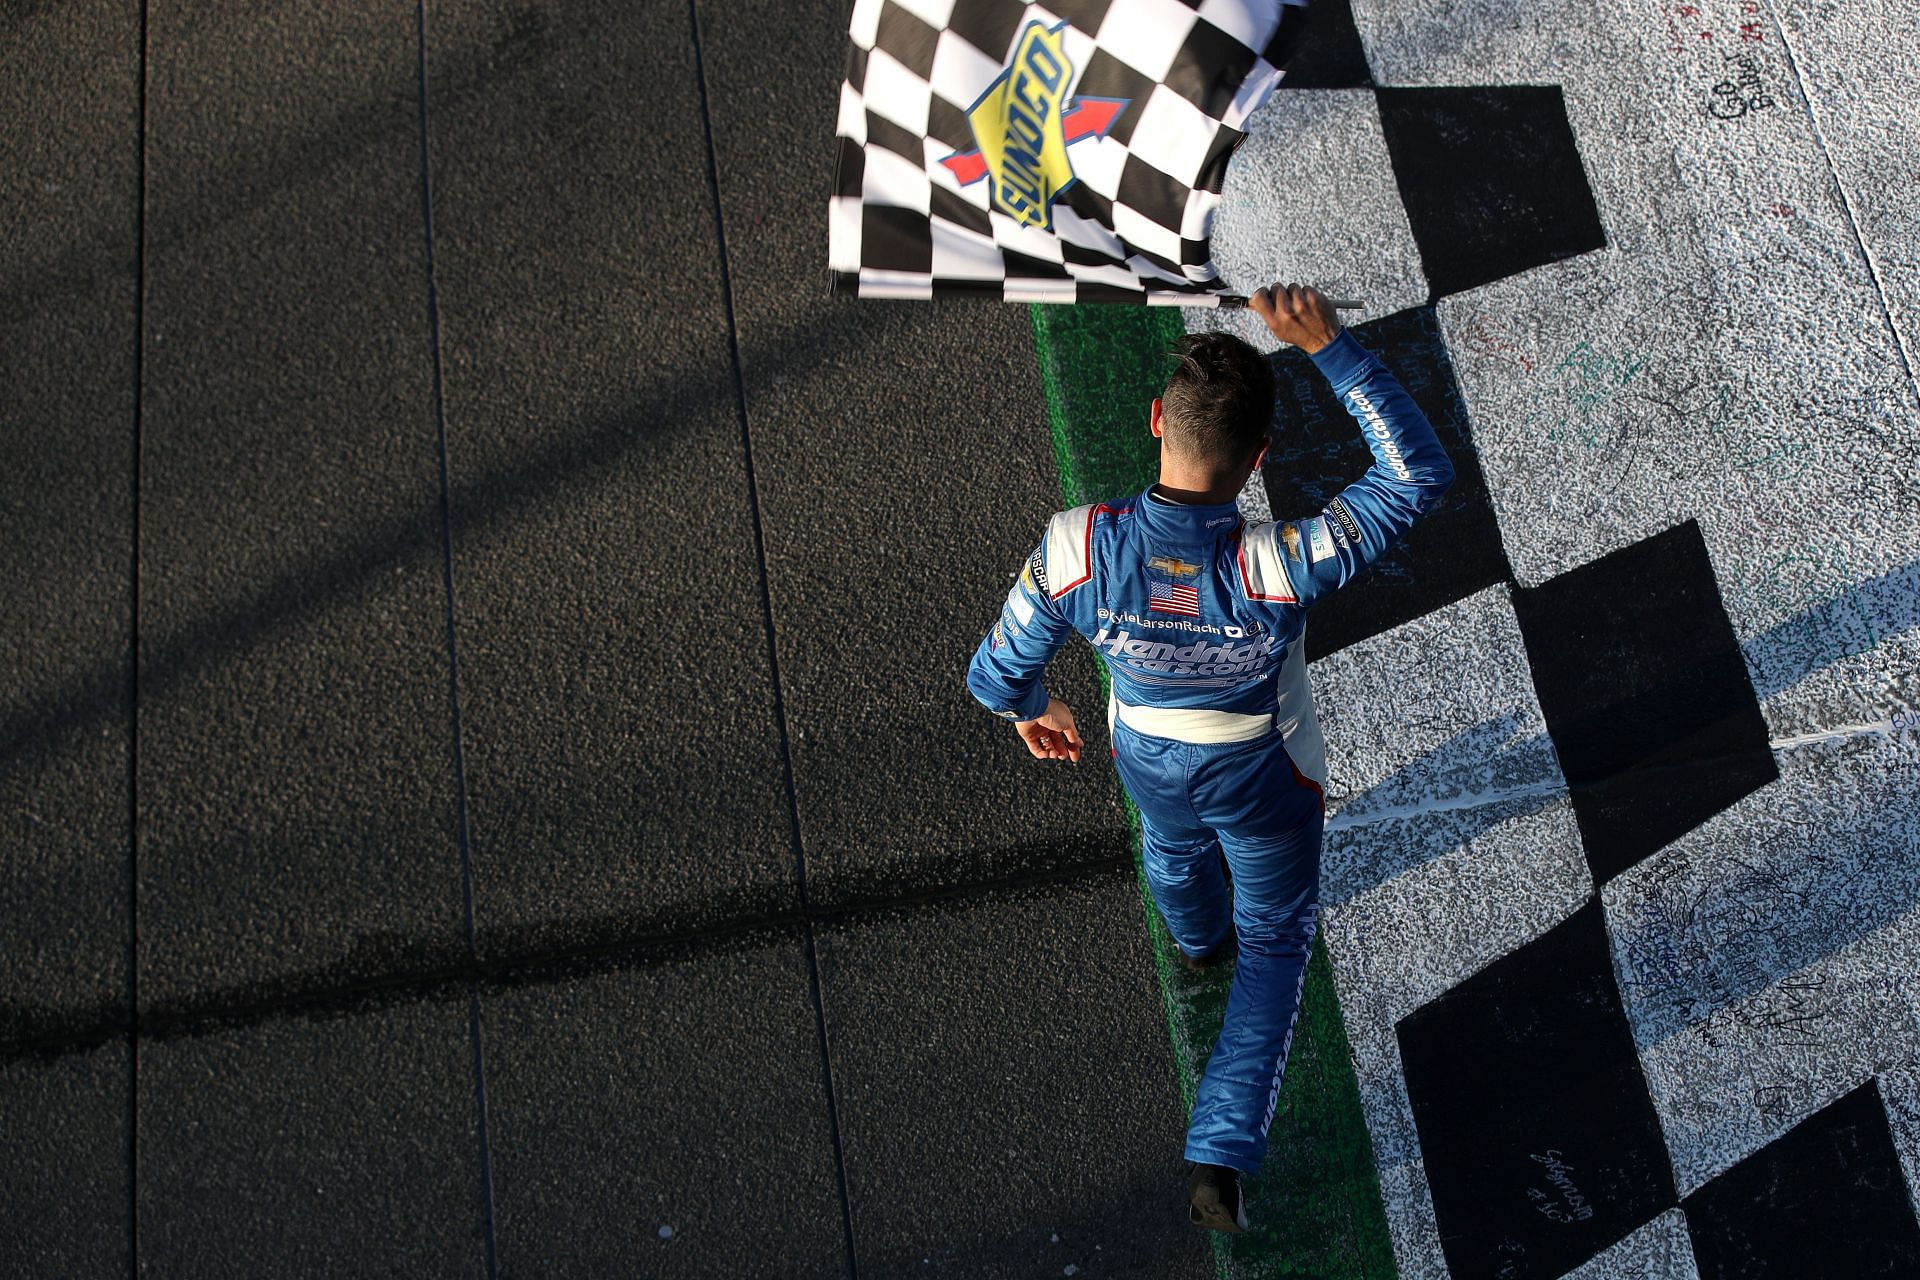 Kyle Larson celebrates with the checkered flag after winning the Wise Power 400 at Auto Club Speedway